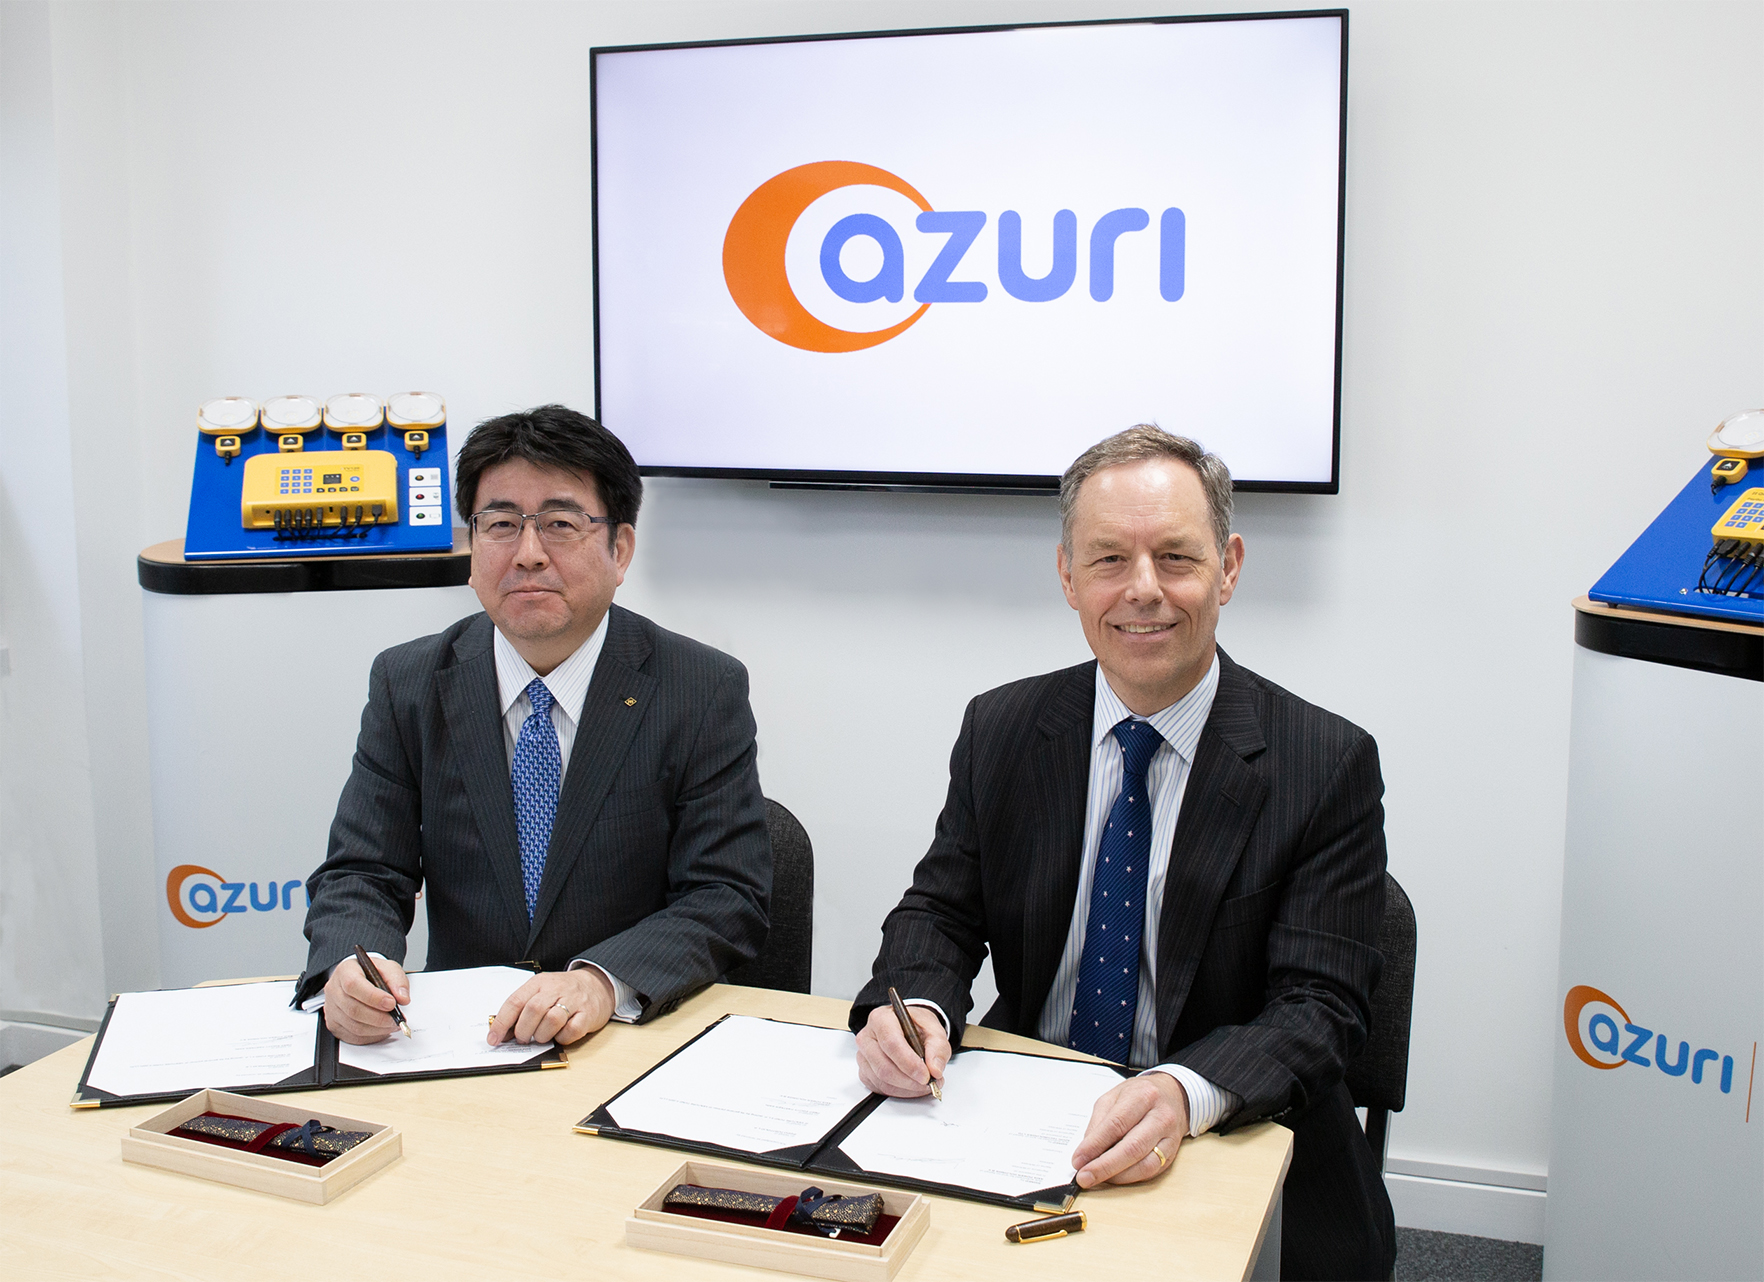 Azuri announces $26 million equity investment targeted at Africa expansion